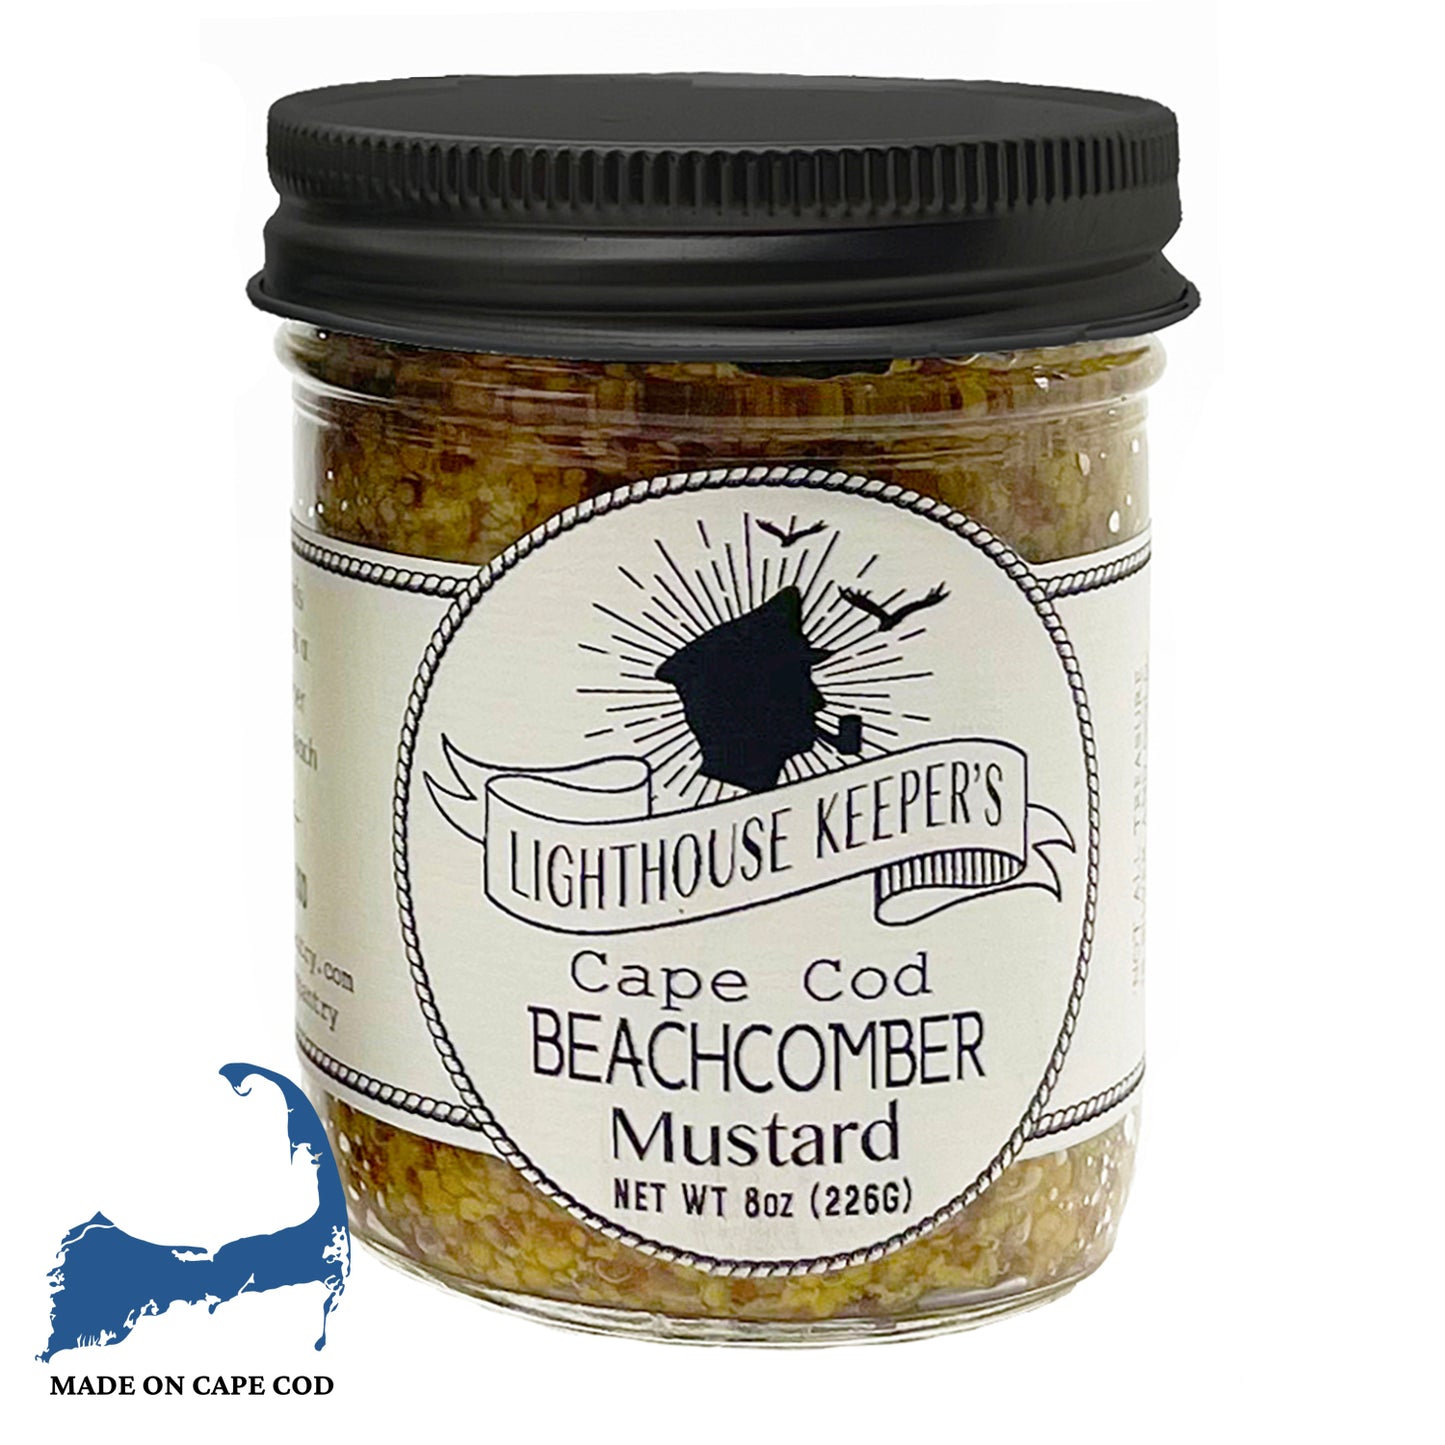 Cape Cod Beachcomber Mustard - Lighthouse Keepers Pantry